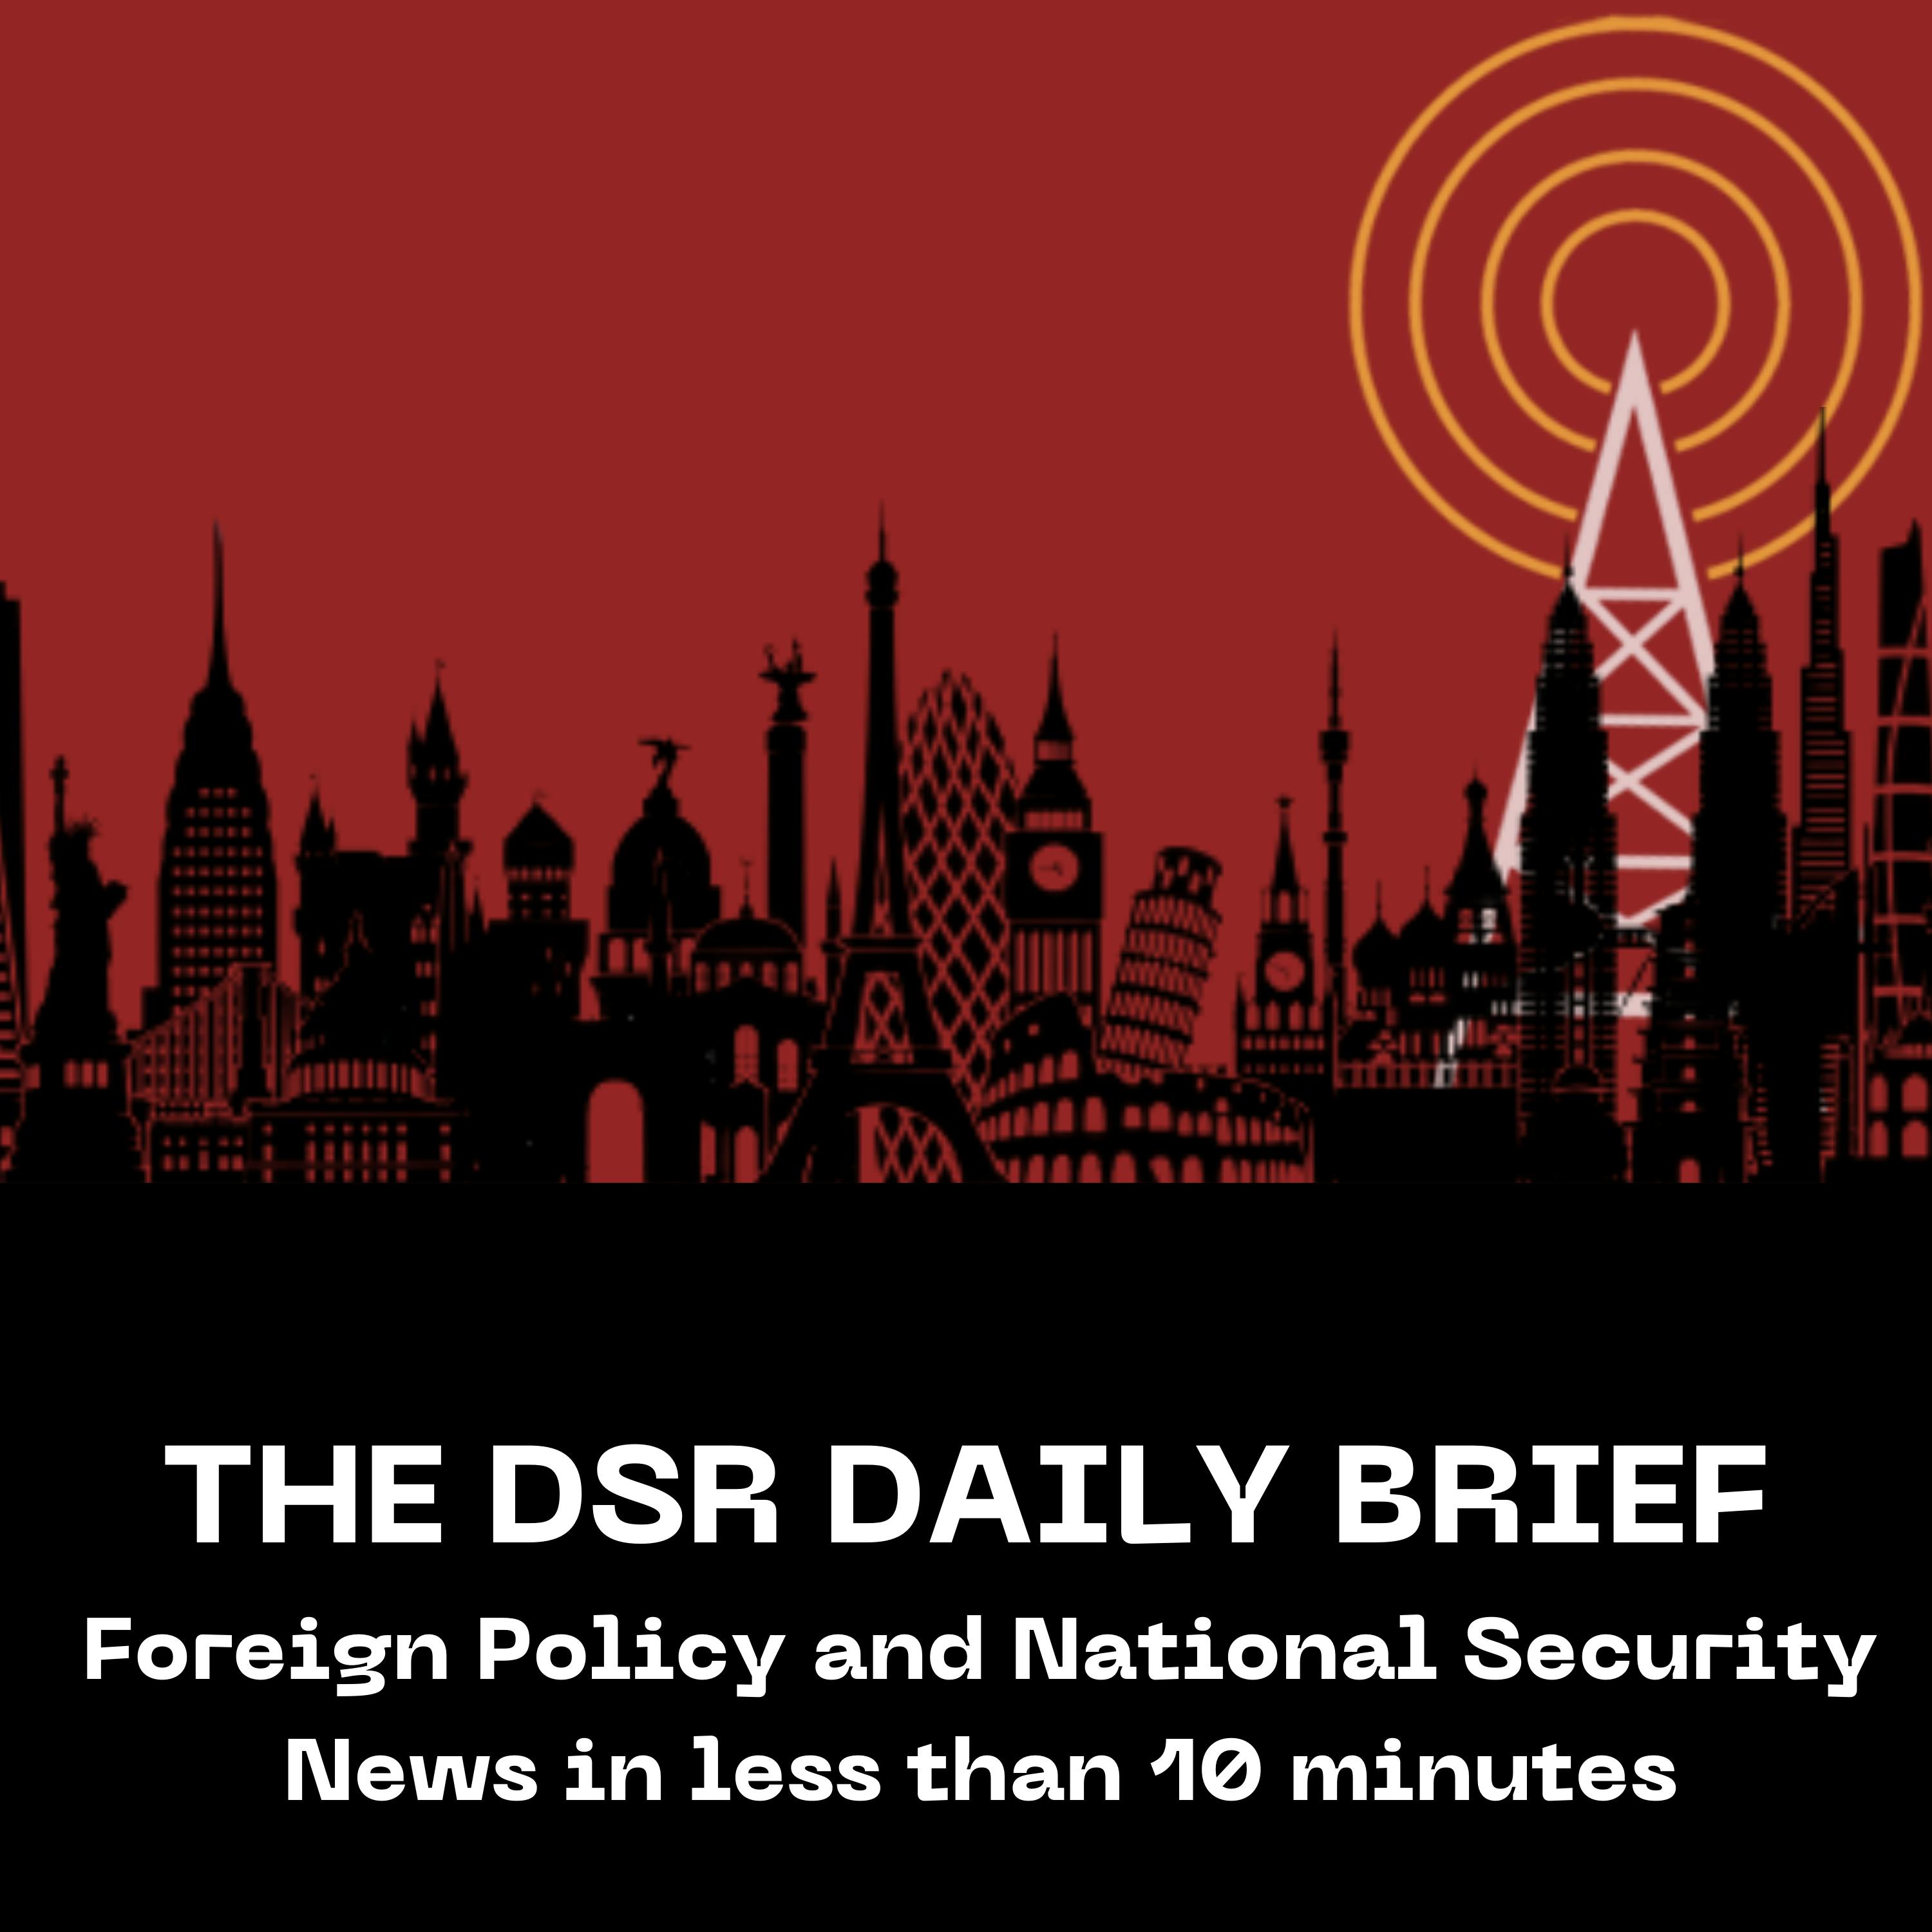 The DSR Daily for May 7: Israel Seizes Rafah Border Crossing, Putin Inaugurated for Fifth Term